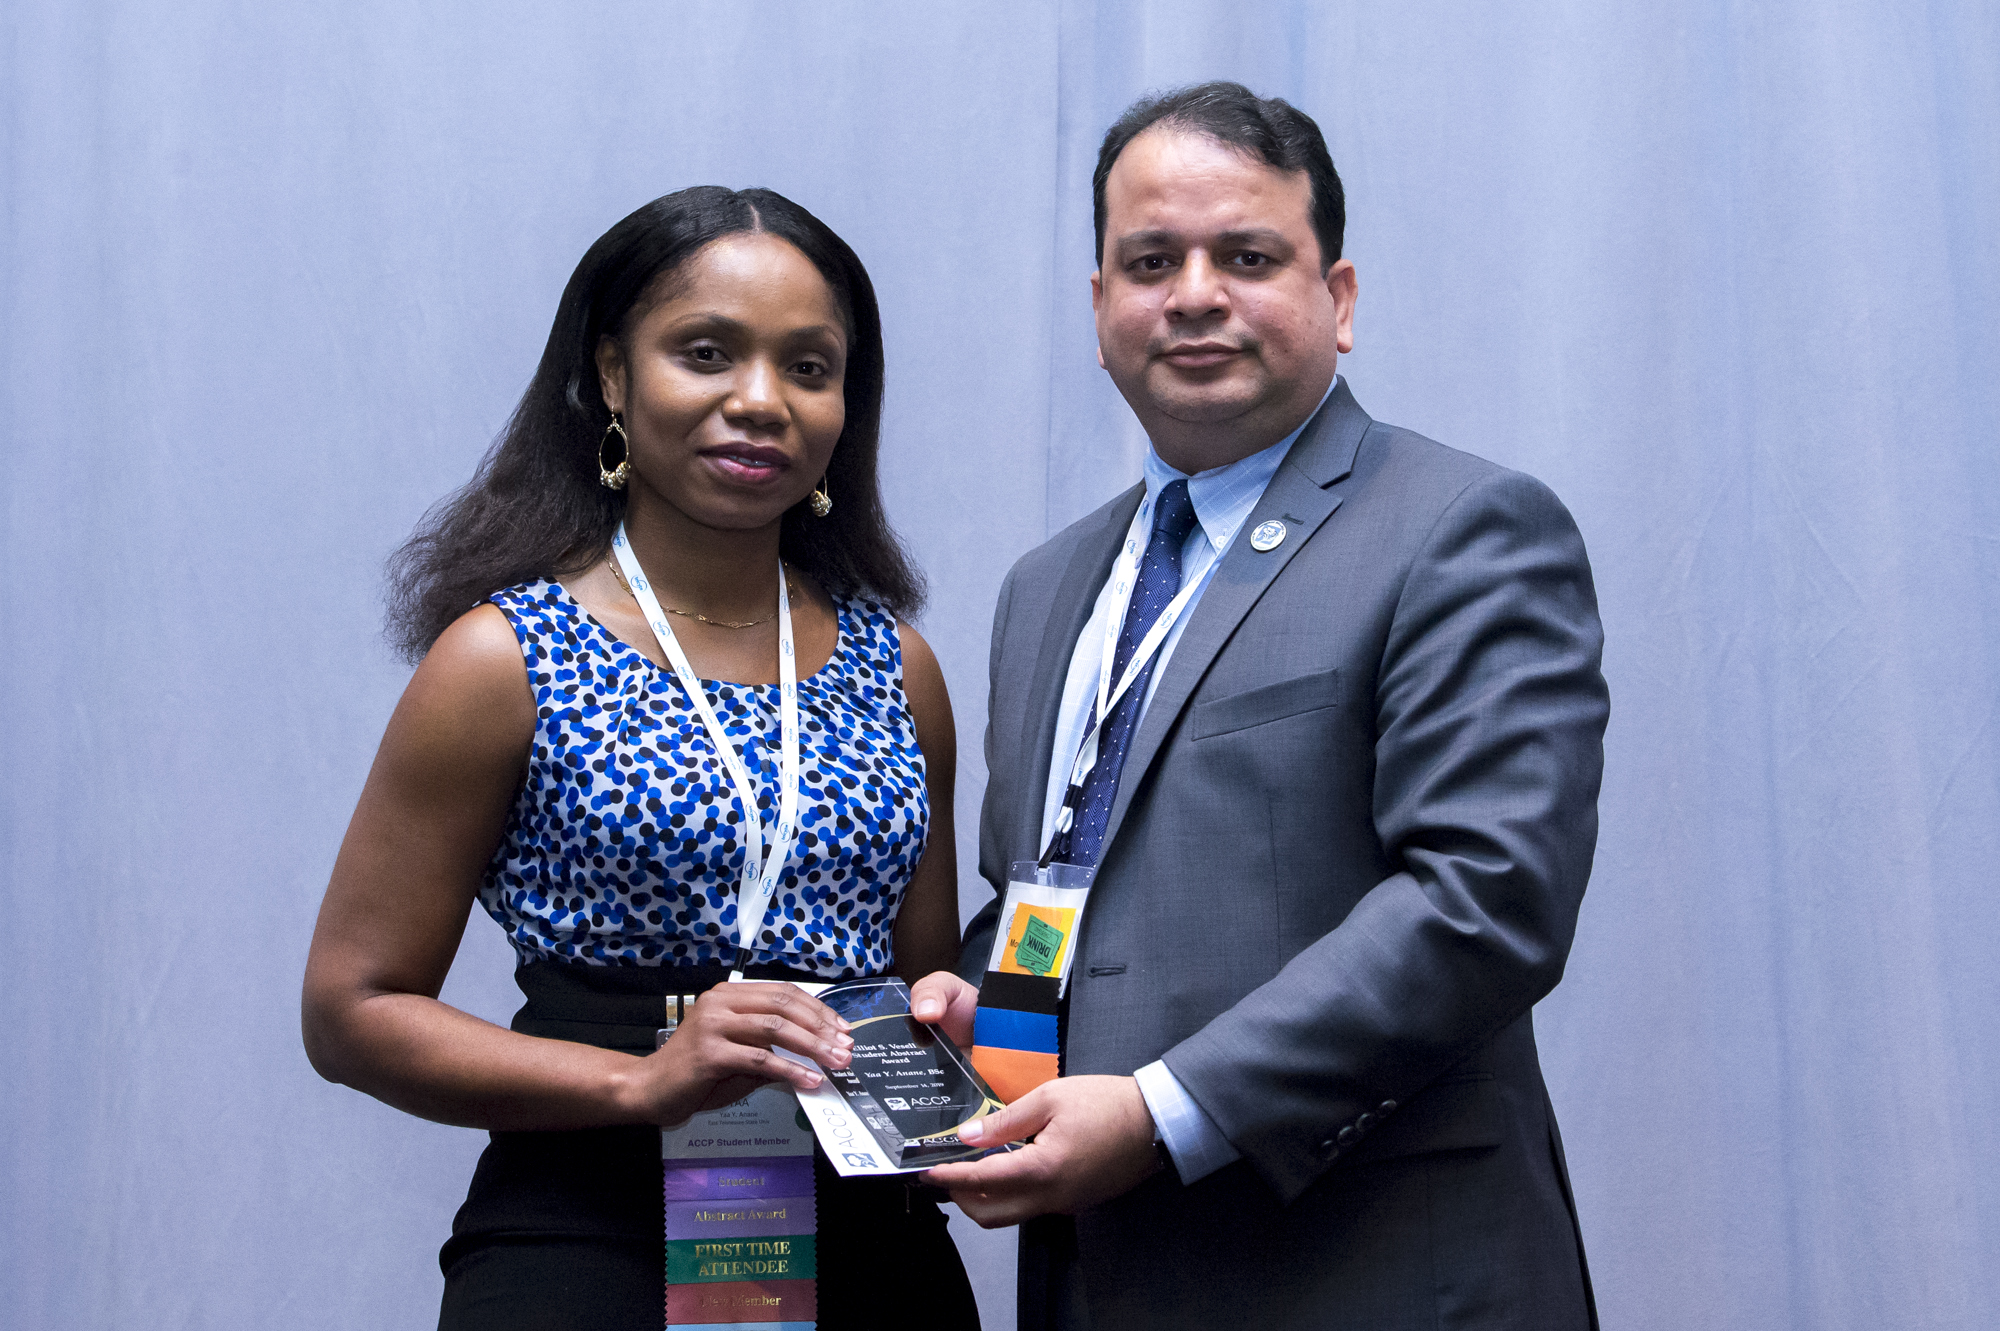 Yaa Y. Anane receives the  Elliot S. Vesell Student Abstract Award